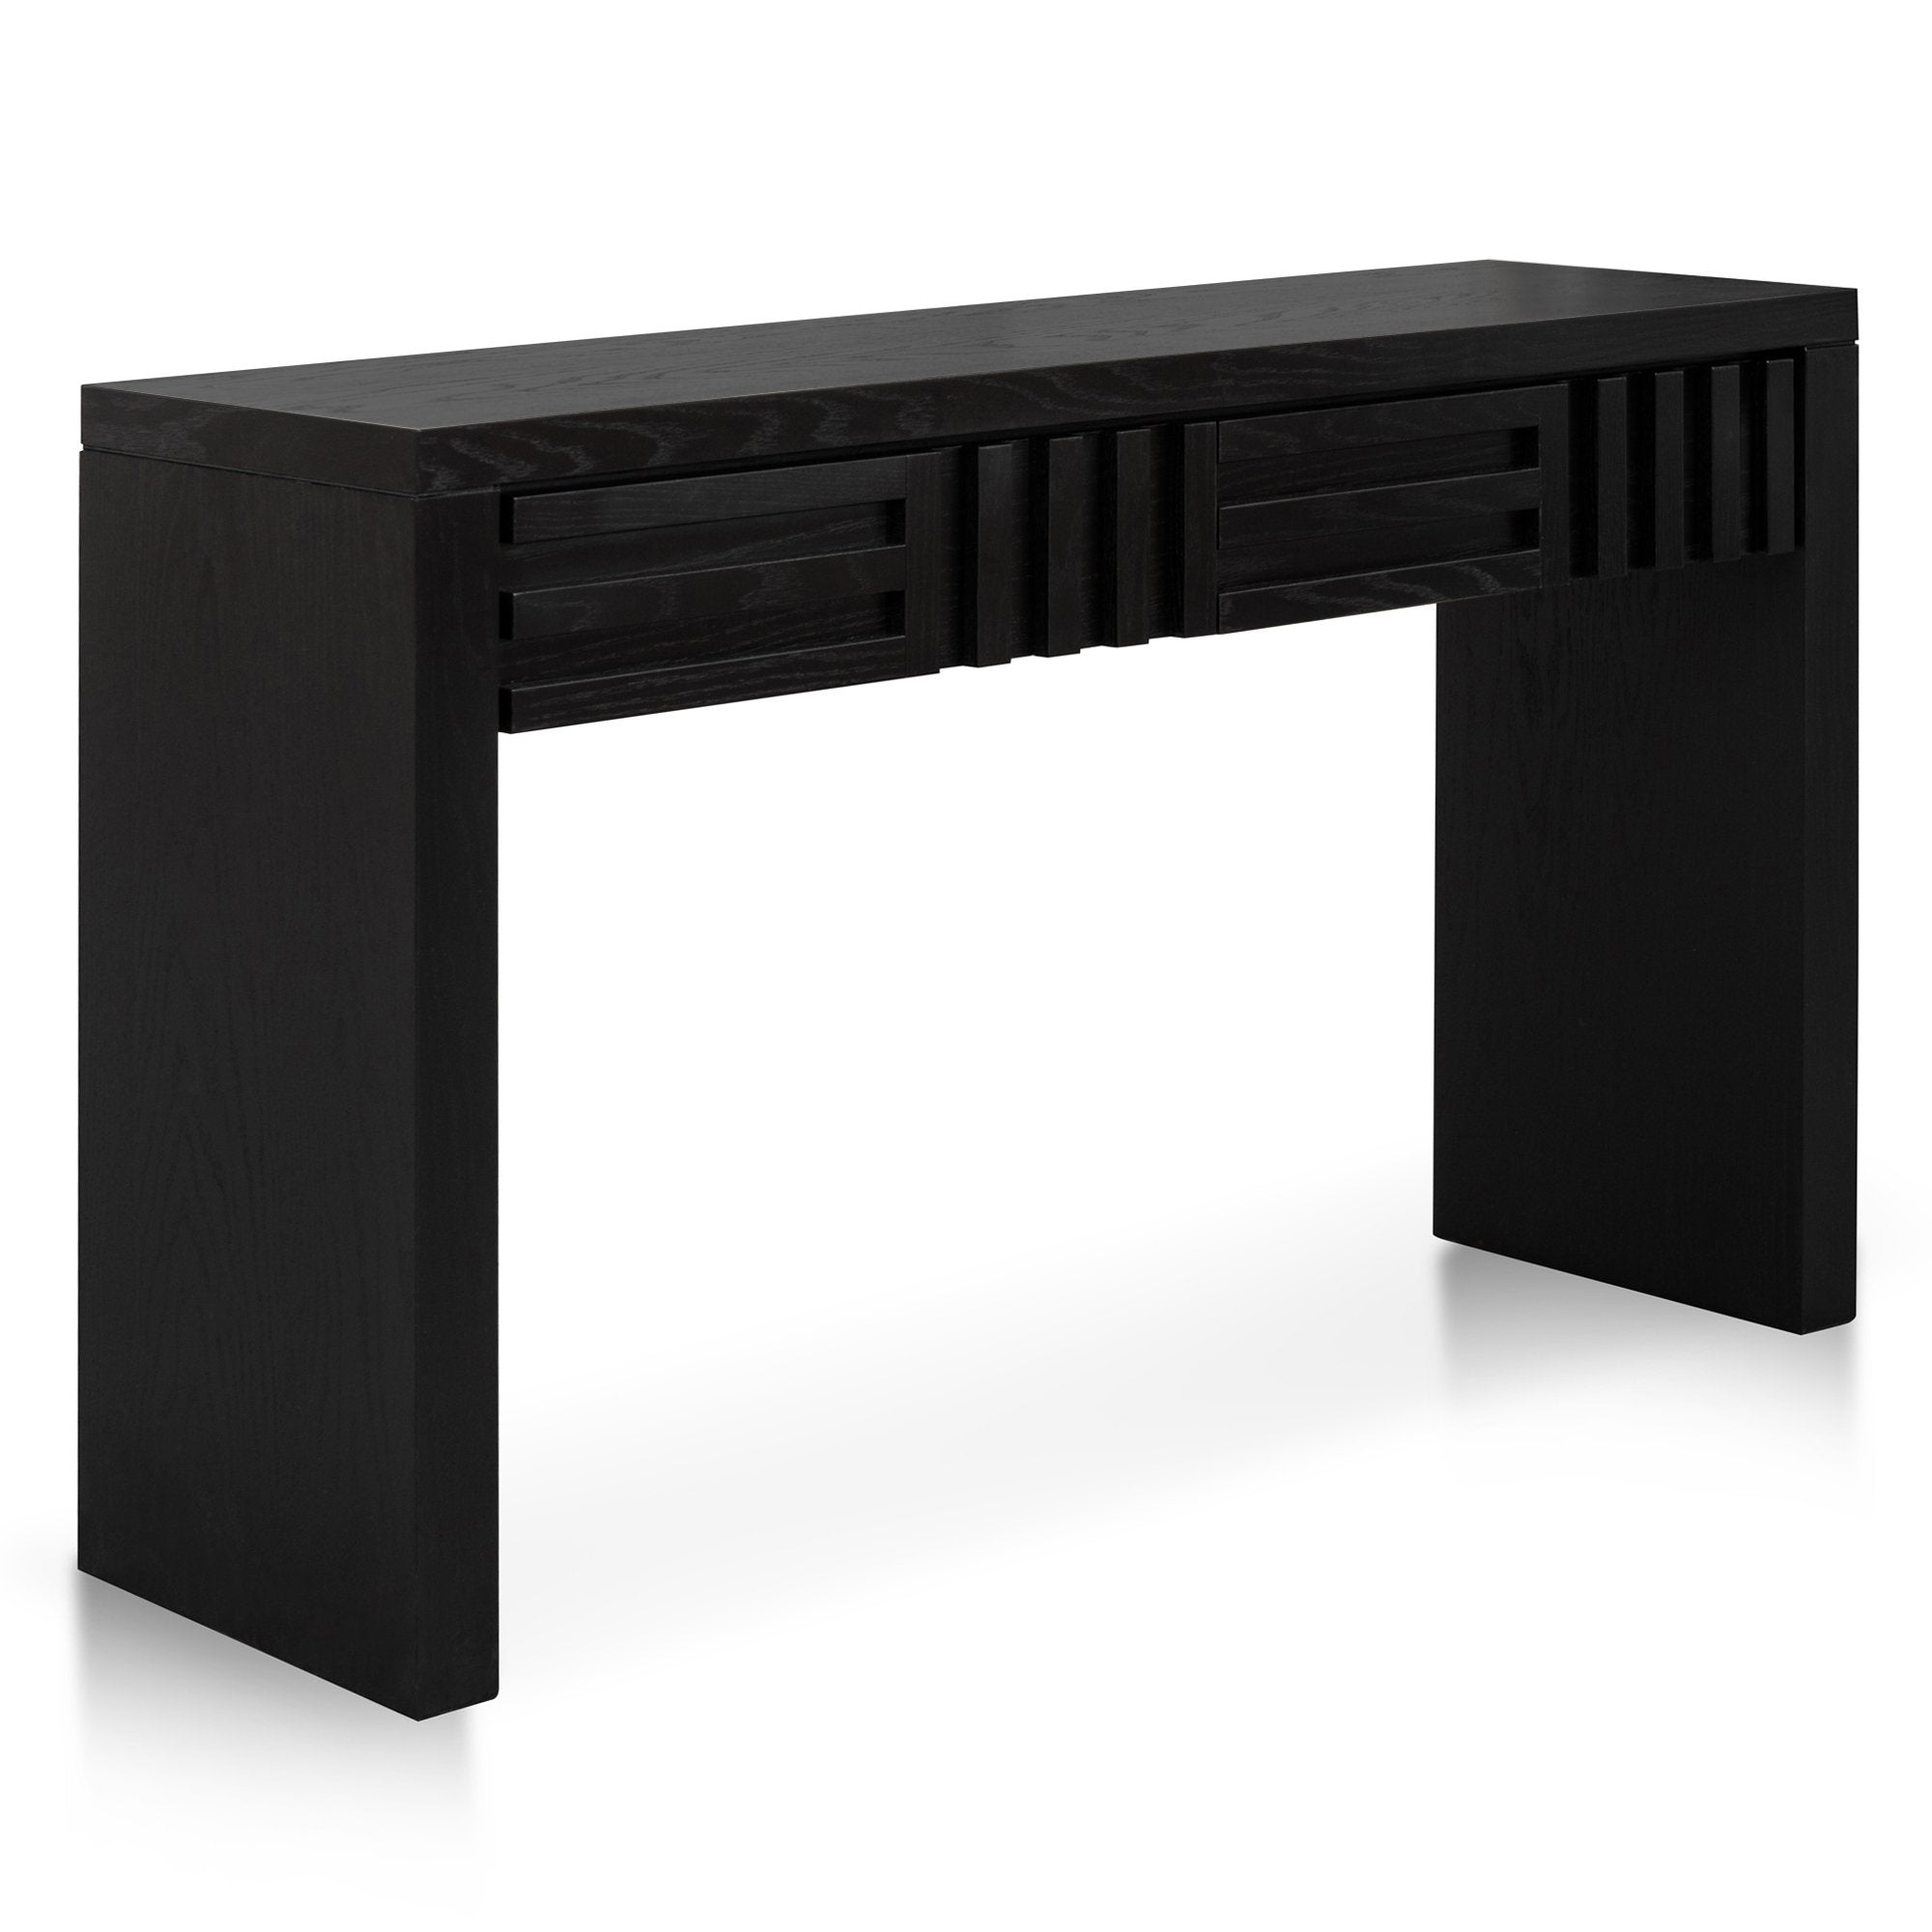 Adrian Wooden Console Table with Drawers - Textured Espresso Black - Console